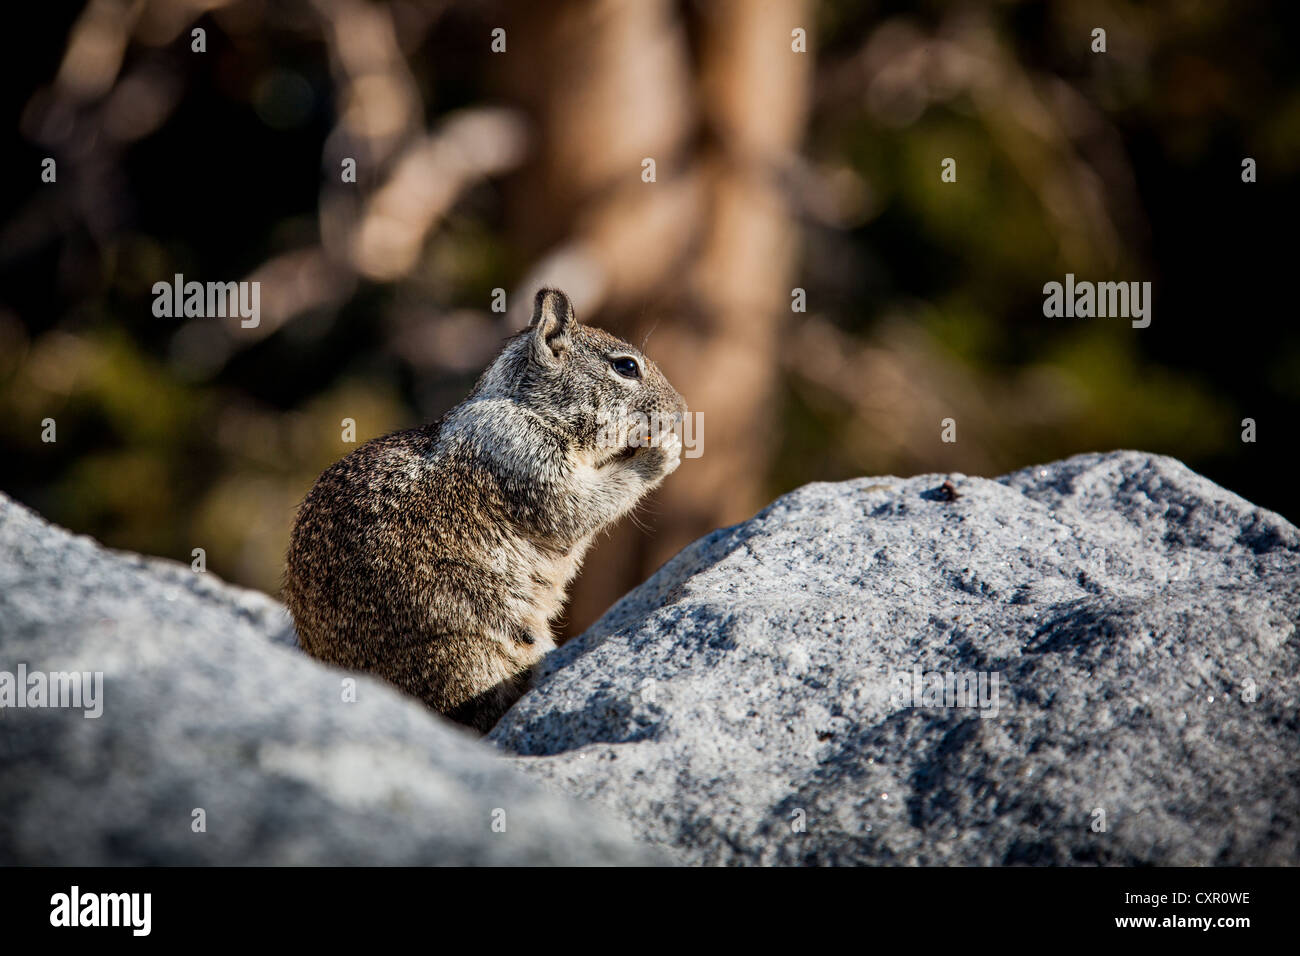 A well fed squirrel eating a nut in Yosemite National Park's High Sierra, California, USA Stock Photo